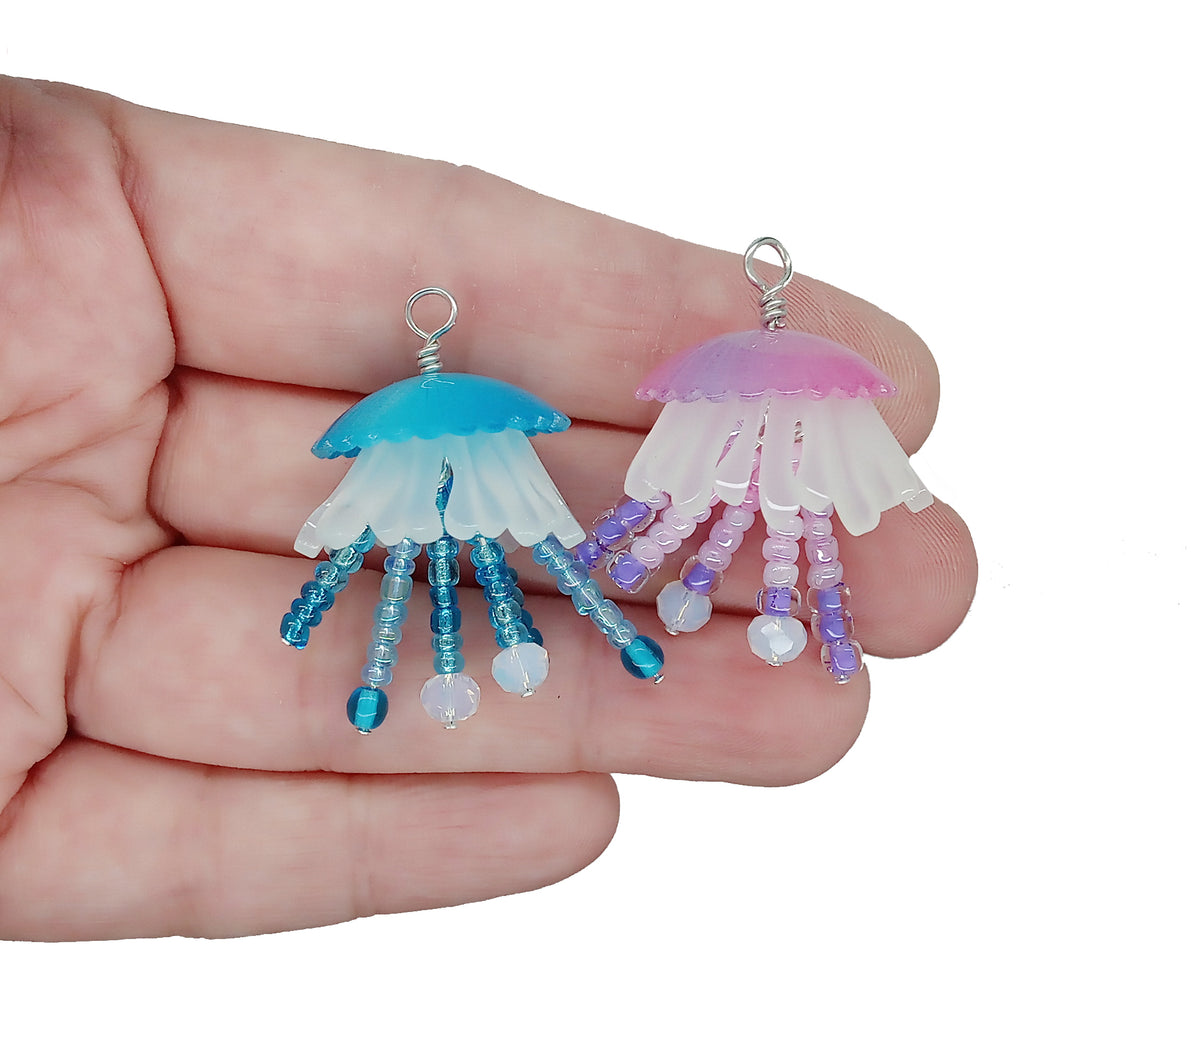 20pcs Transparent Acrylic Jellyfish Beads Cute Ocean Animal jellyfish Beads  Mixed Color for DIY bracelet necklace jewelry making - AliExpress